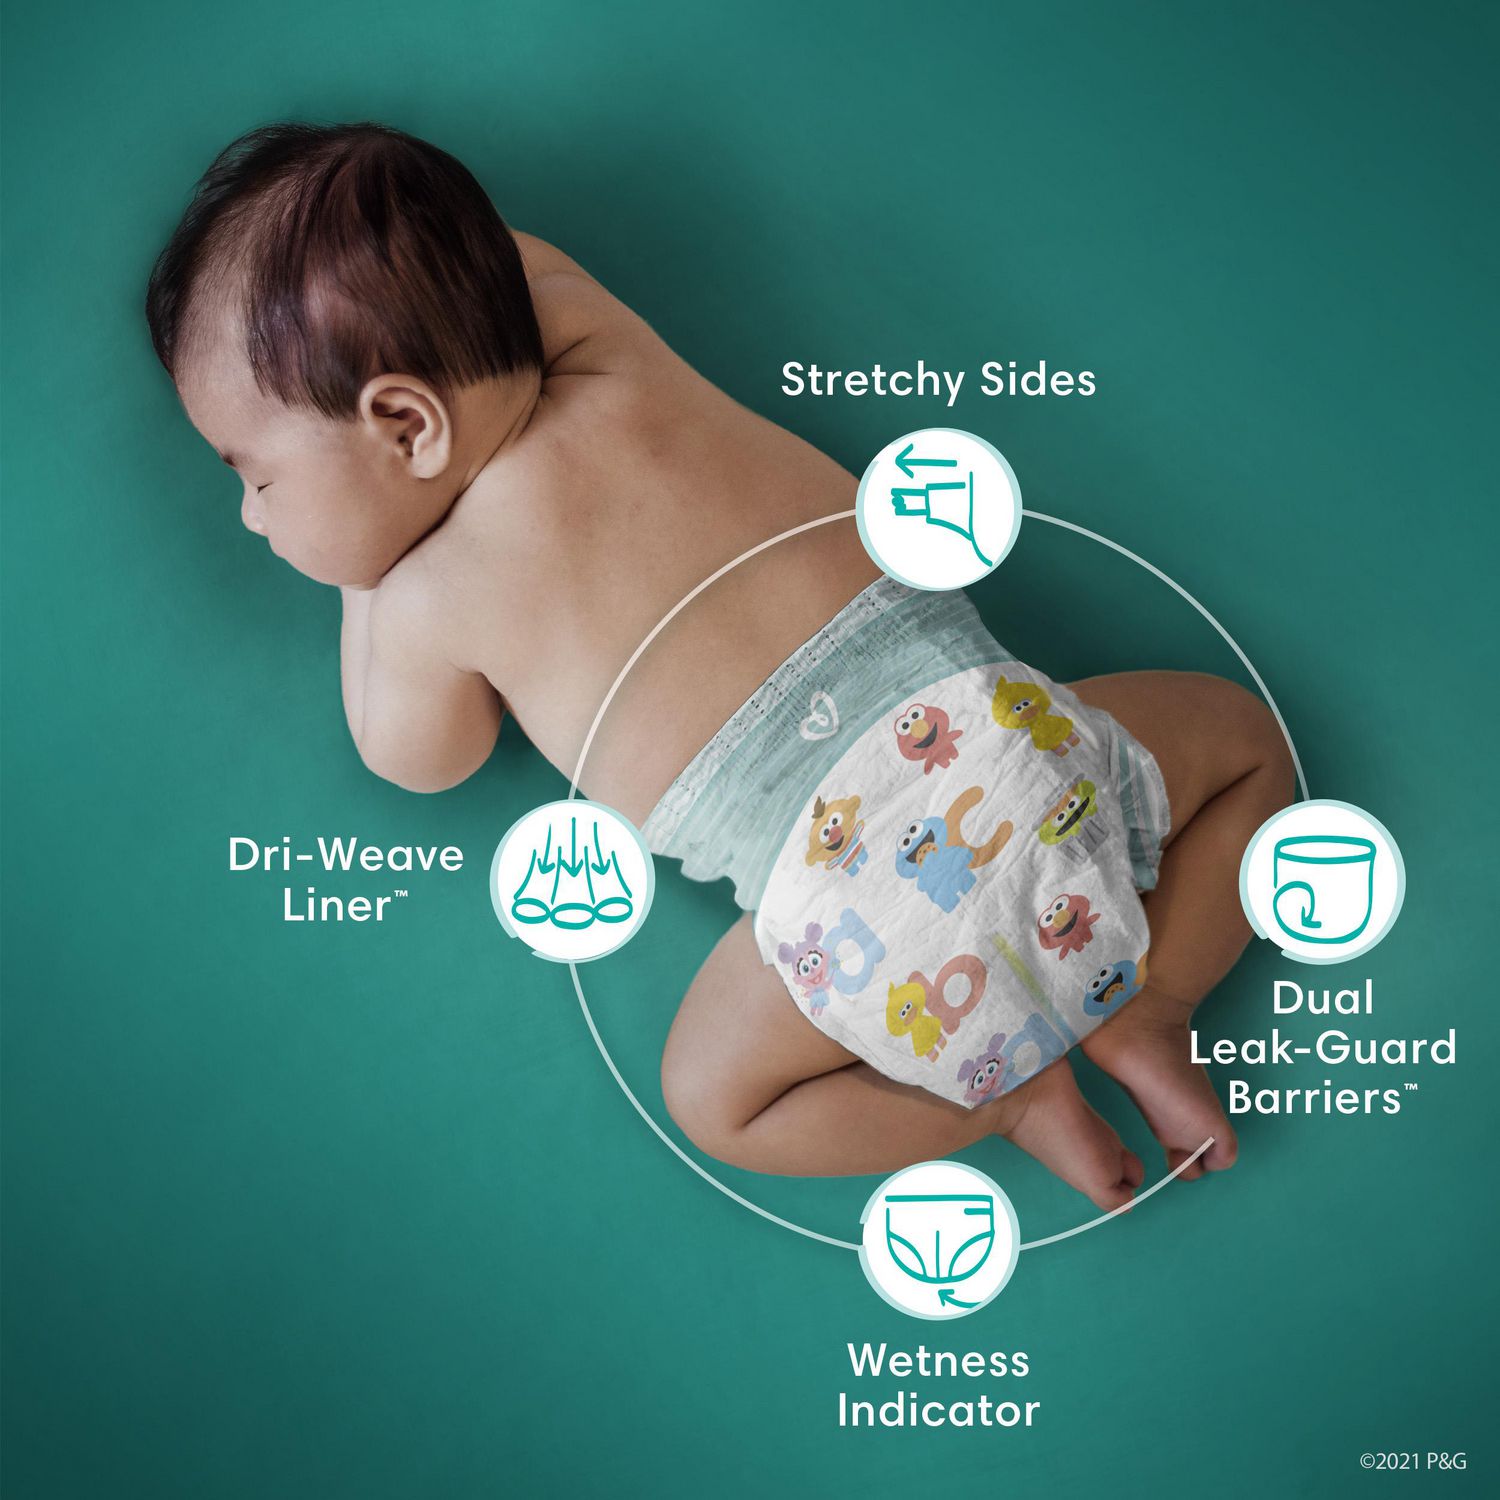 Couches Pampers Baby Dry, format Super Economique 